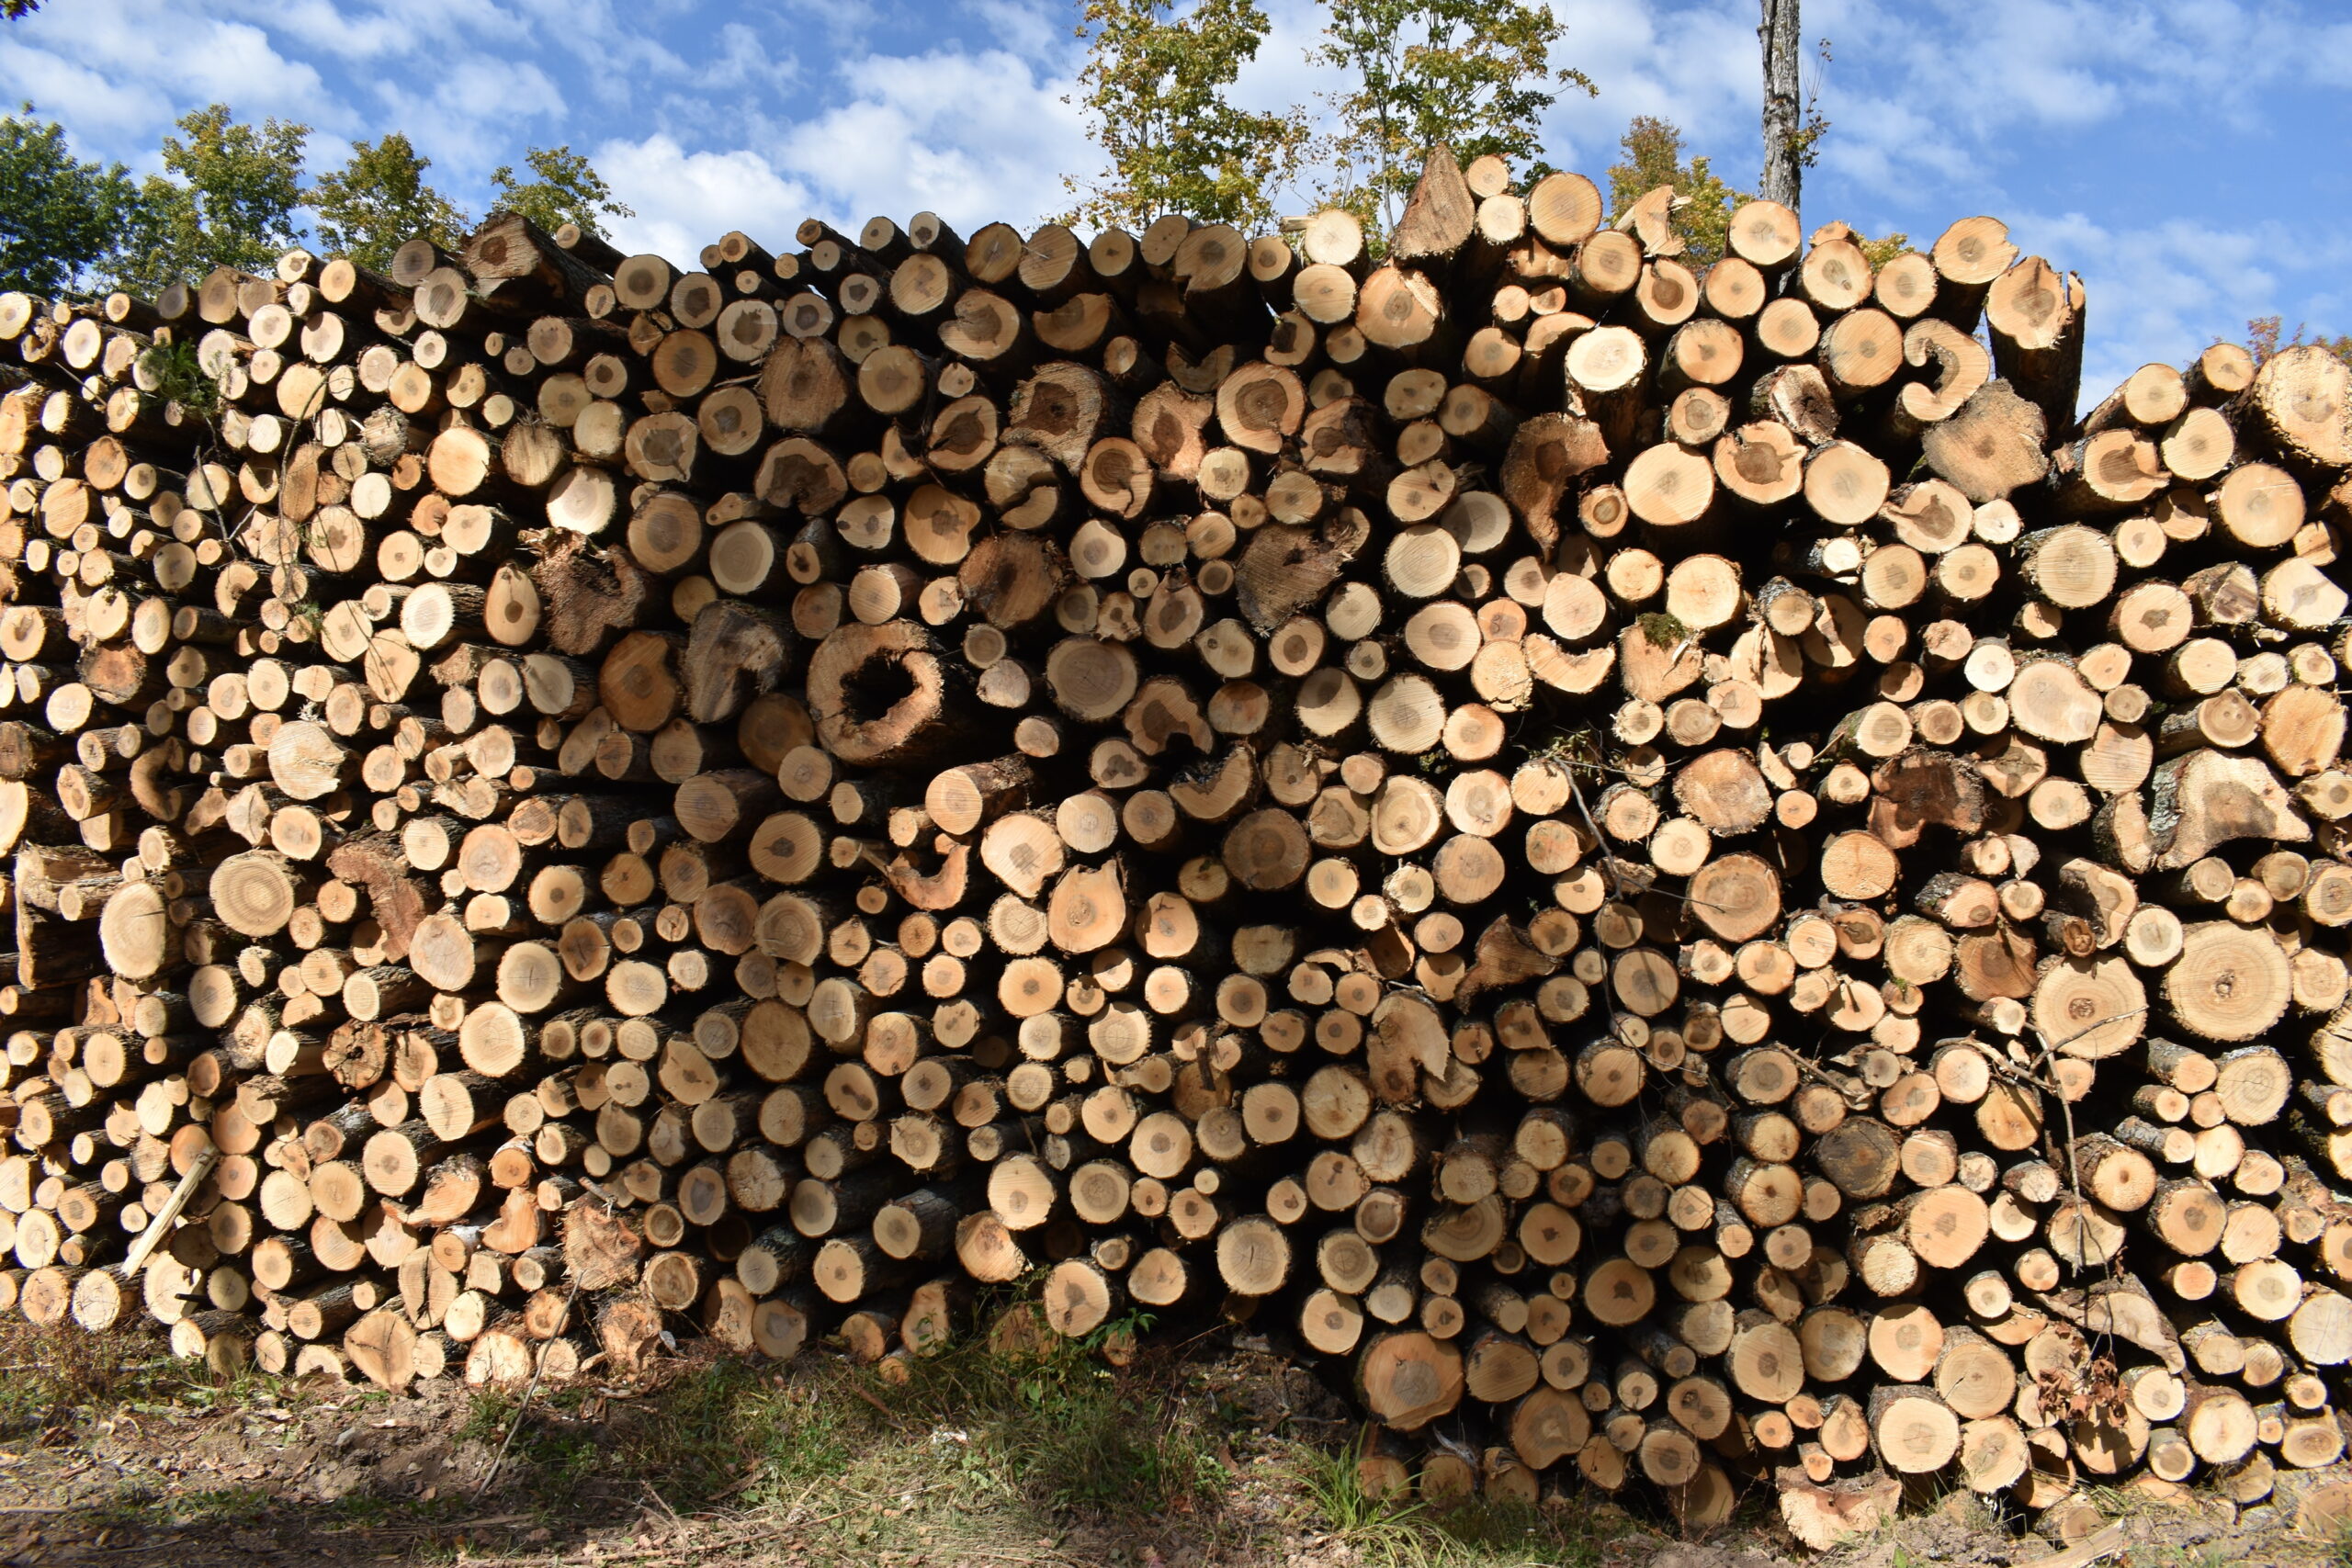 Proposal would allow timber industry to truck heavier loads on more routes